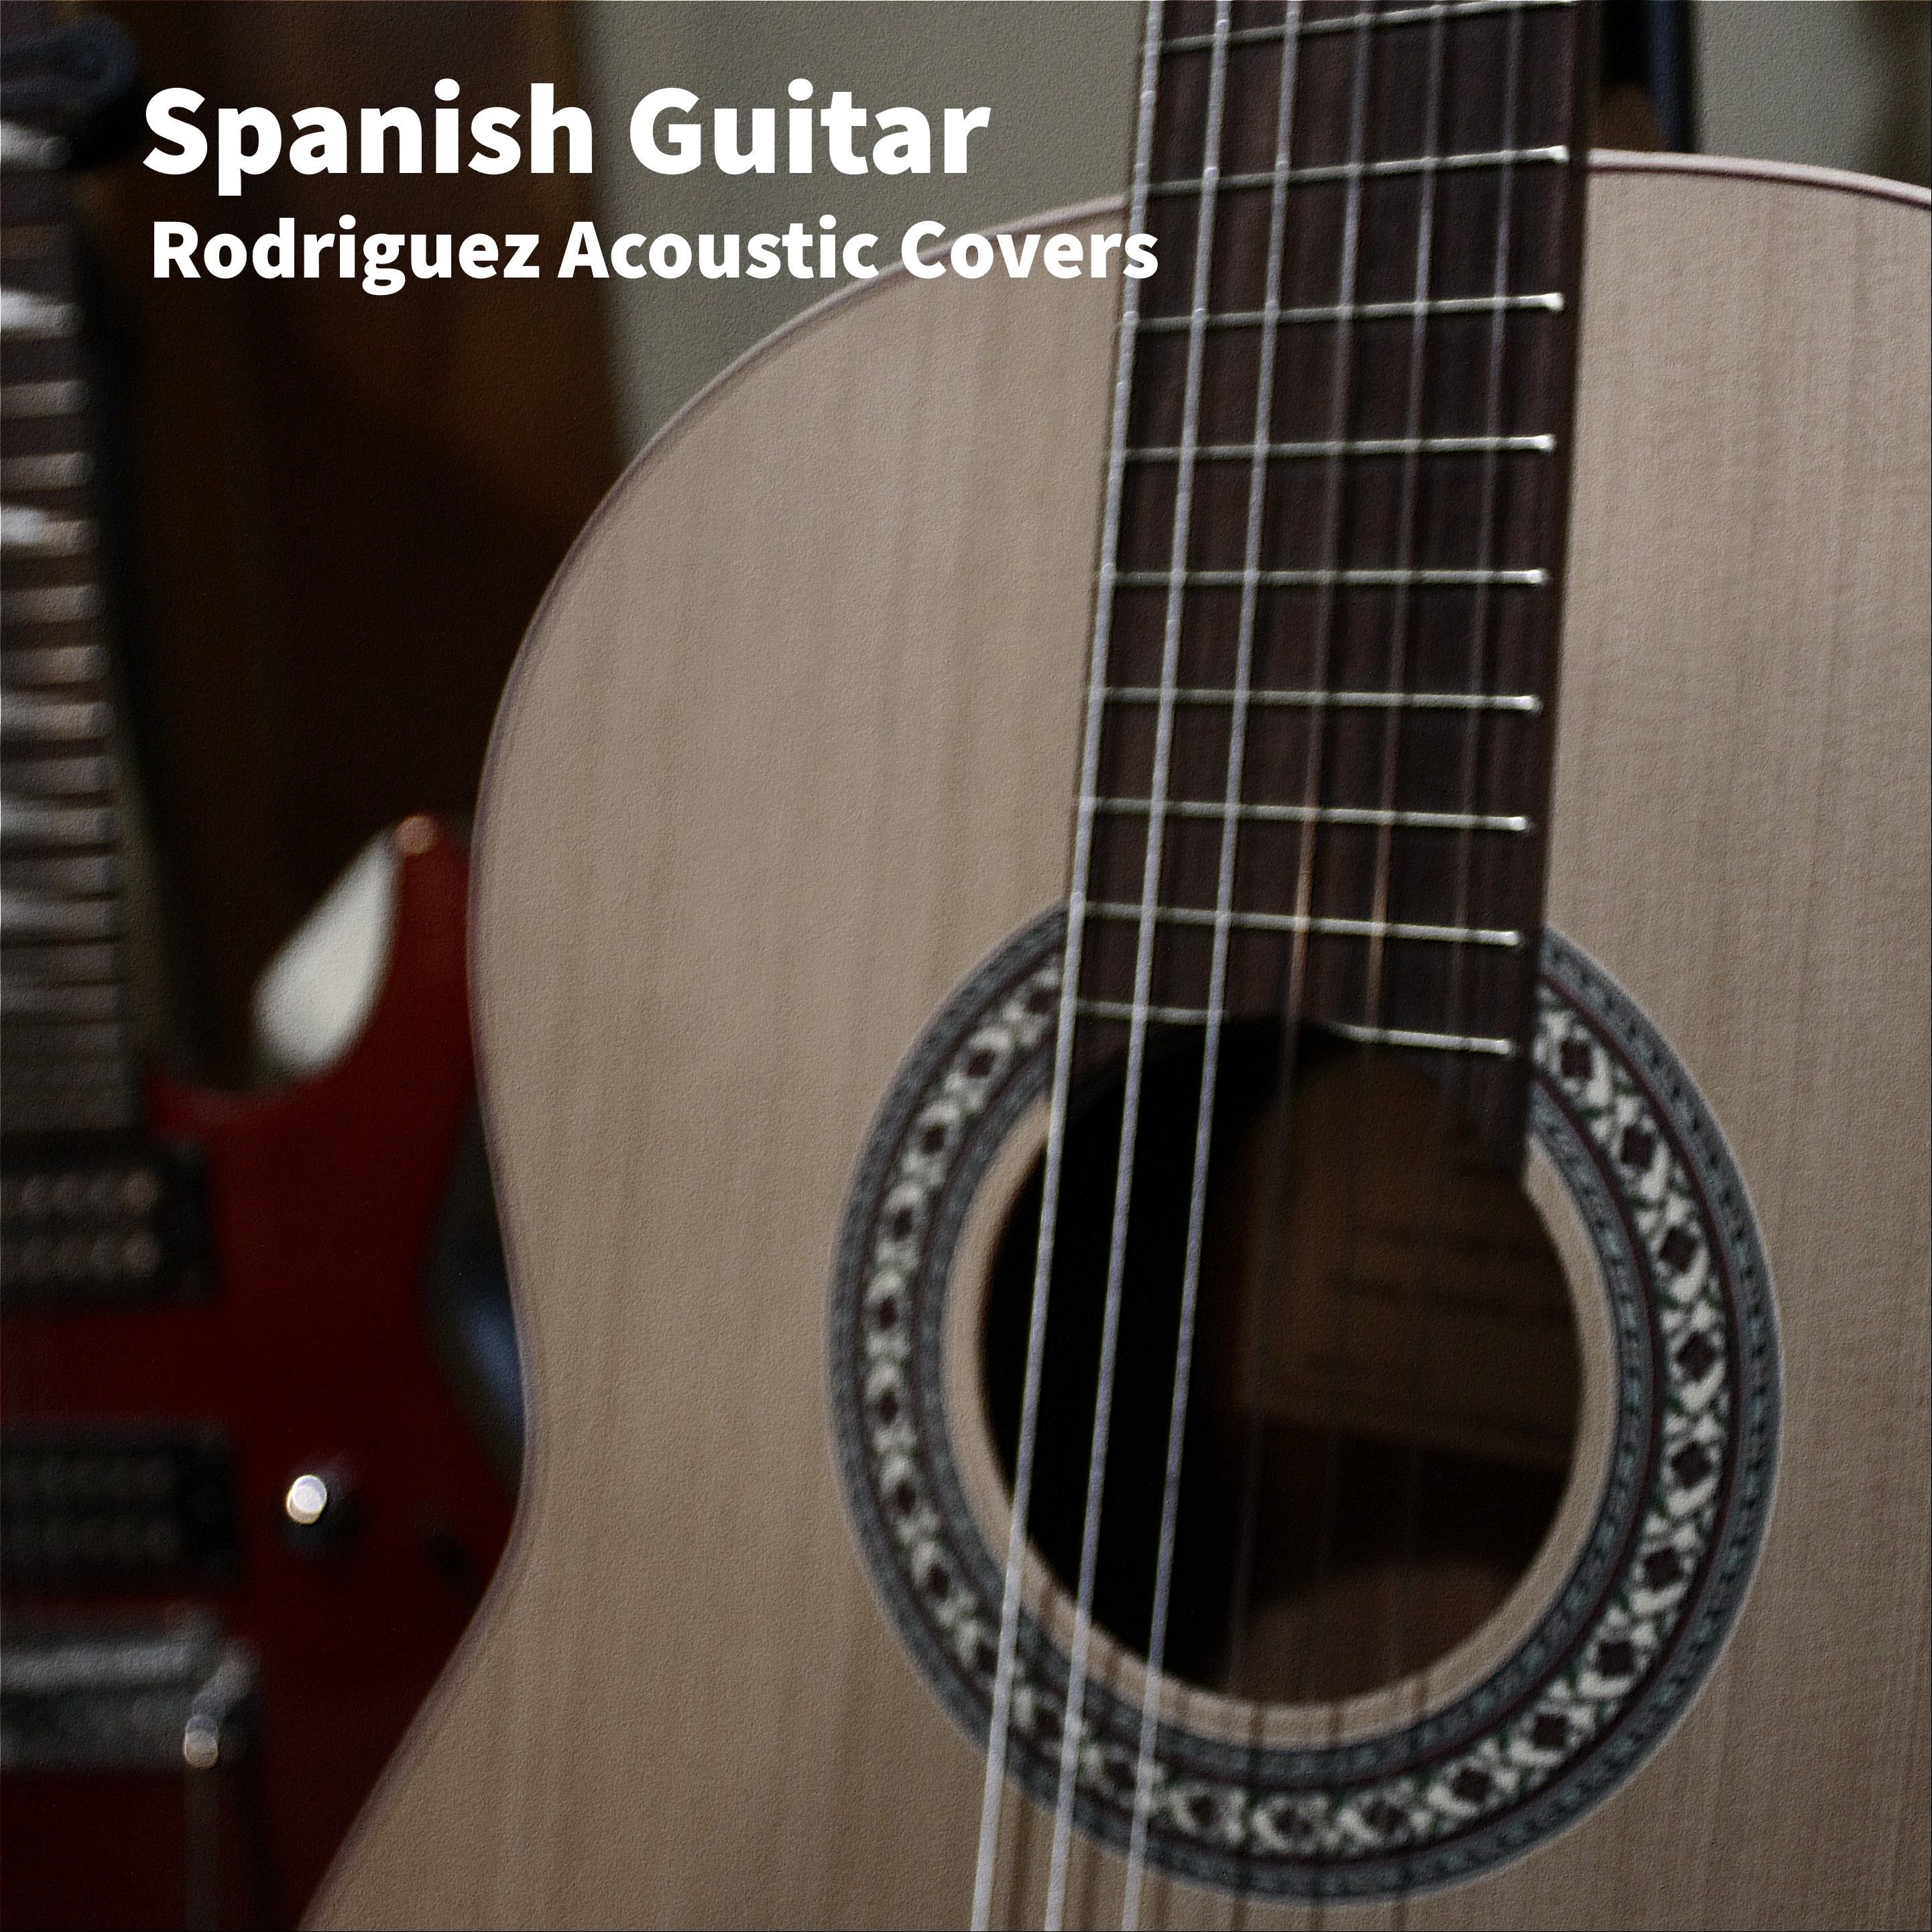 Spanish Guitar: Rodriguez Acoustic Covers